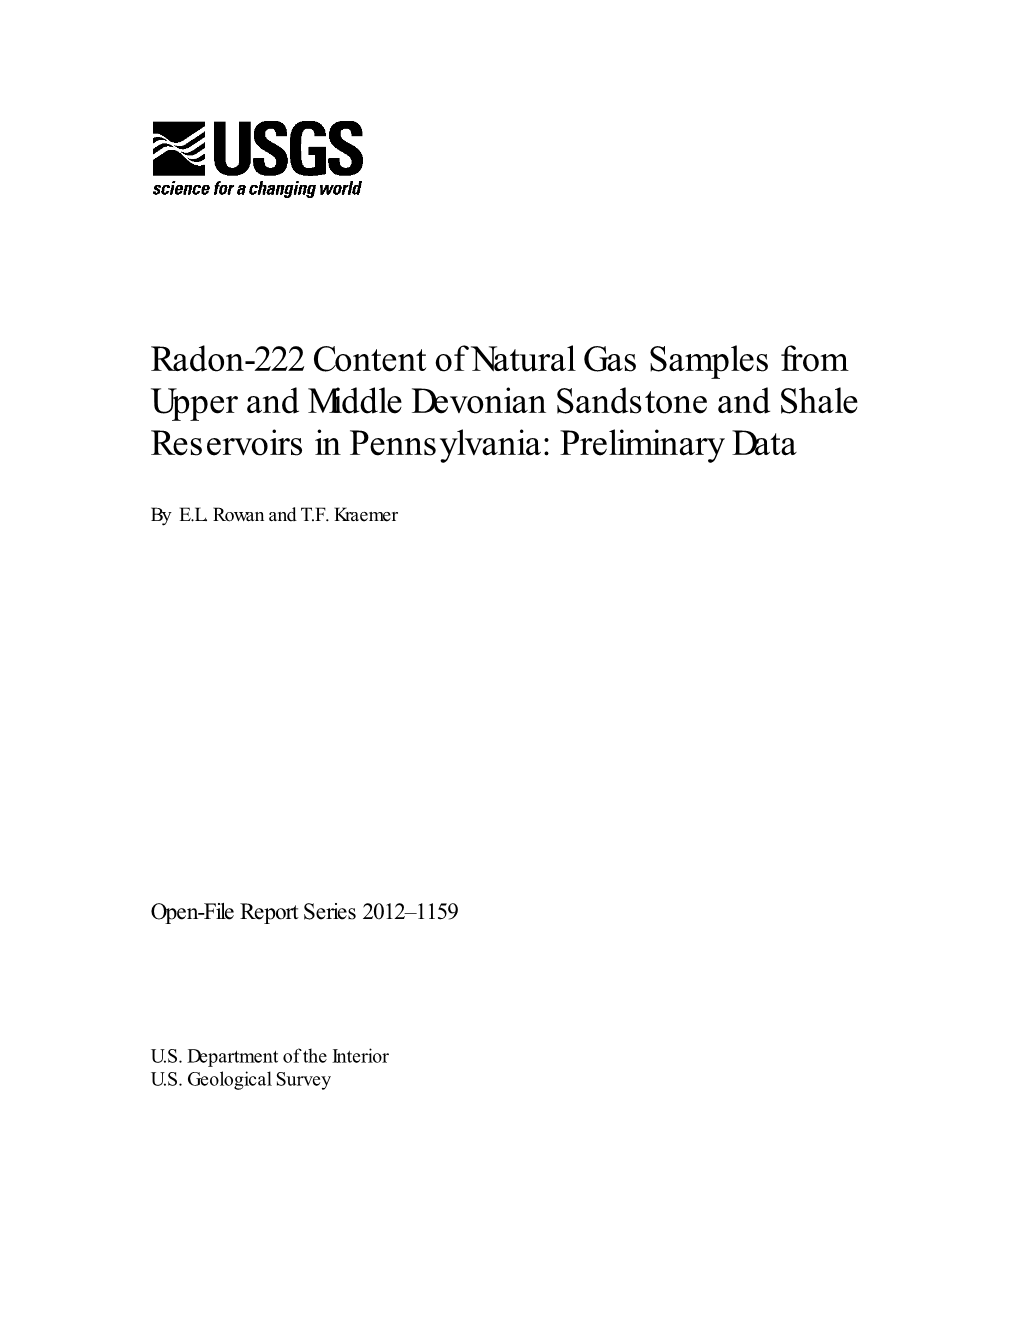 Radon-222 Content of Natural Gas Samples from Upper and Middle Devonian Sandstone and Shale Reservoirs in Pennsylvania: Preliminary Data